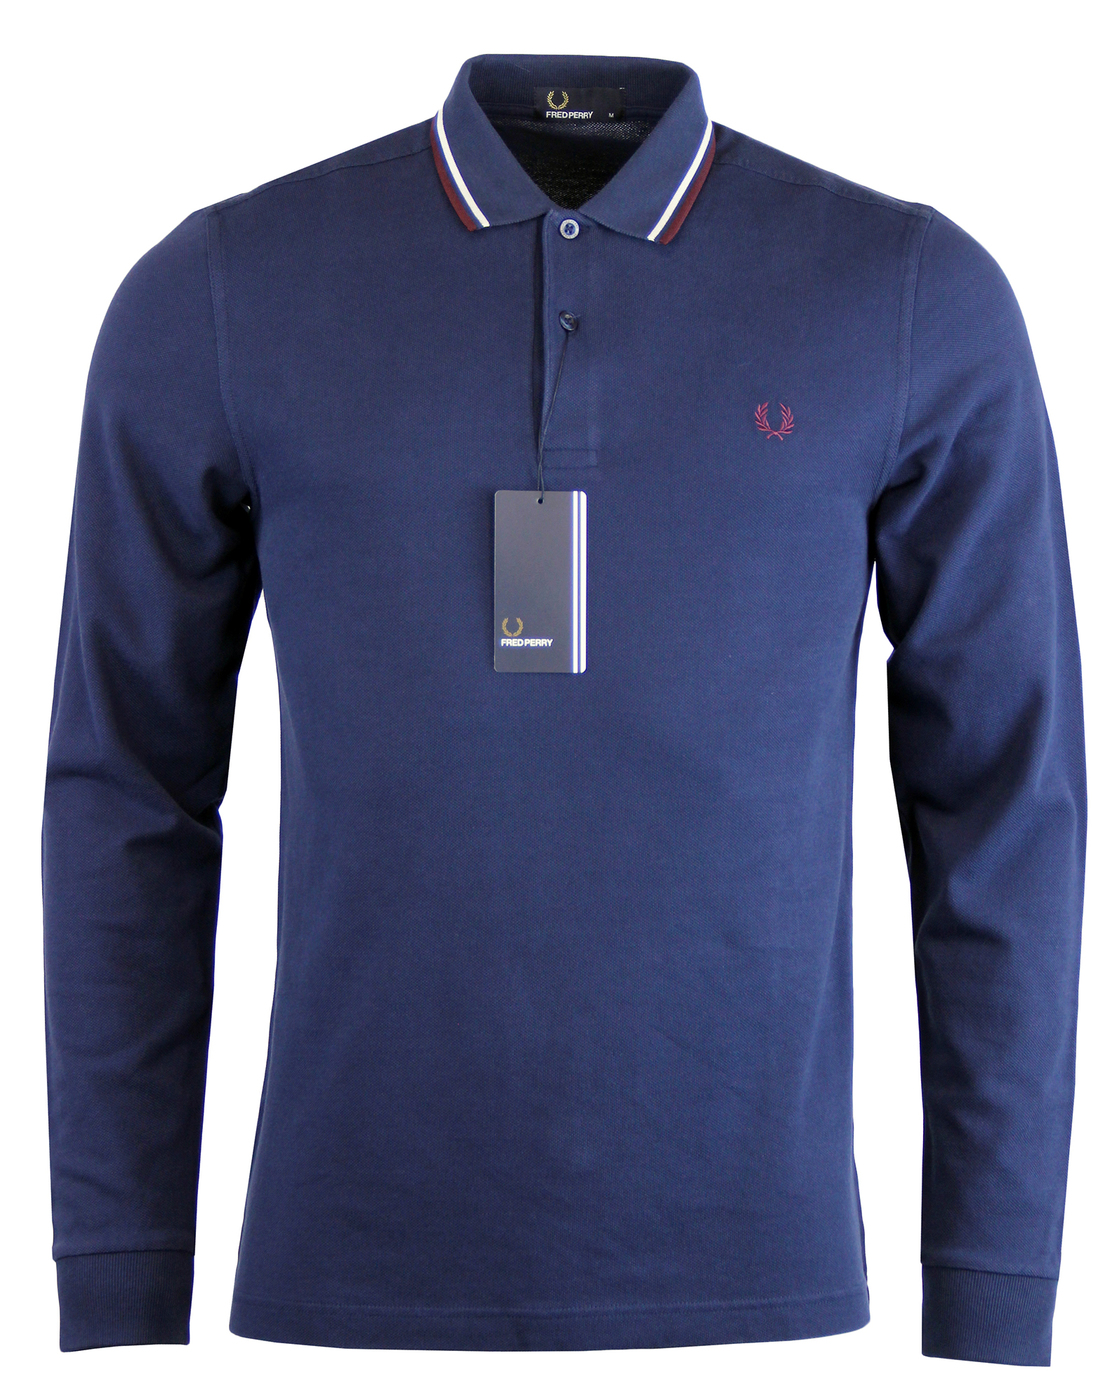 FRED PERRY Retro Mod Twin Tipped LS Polo